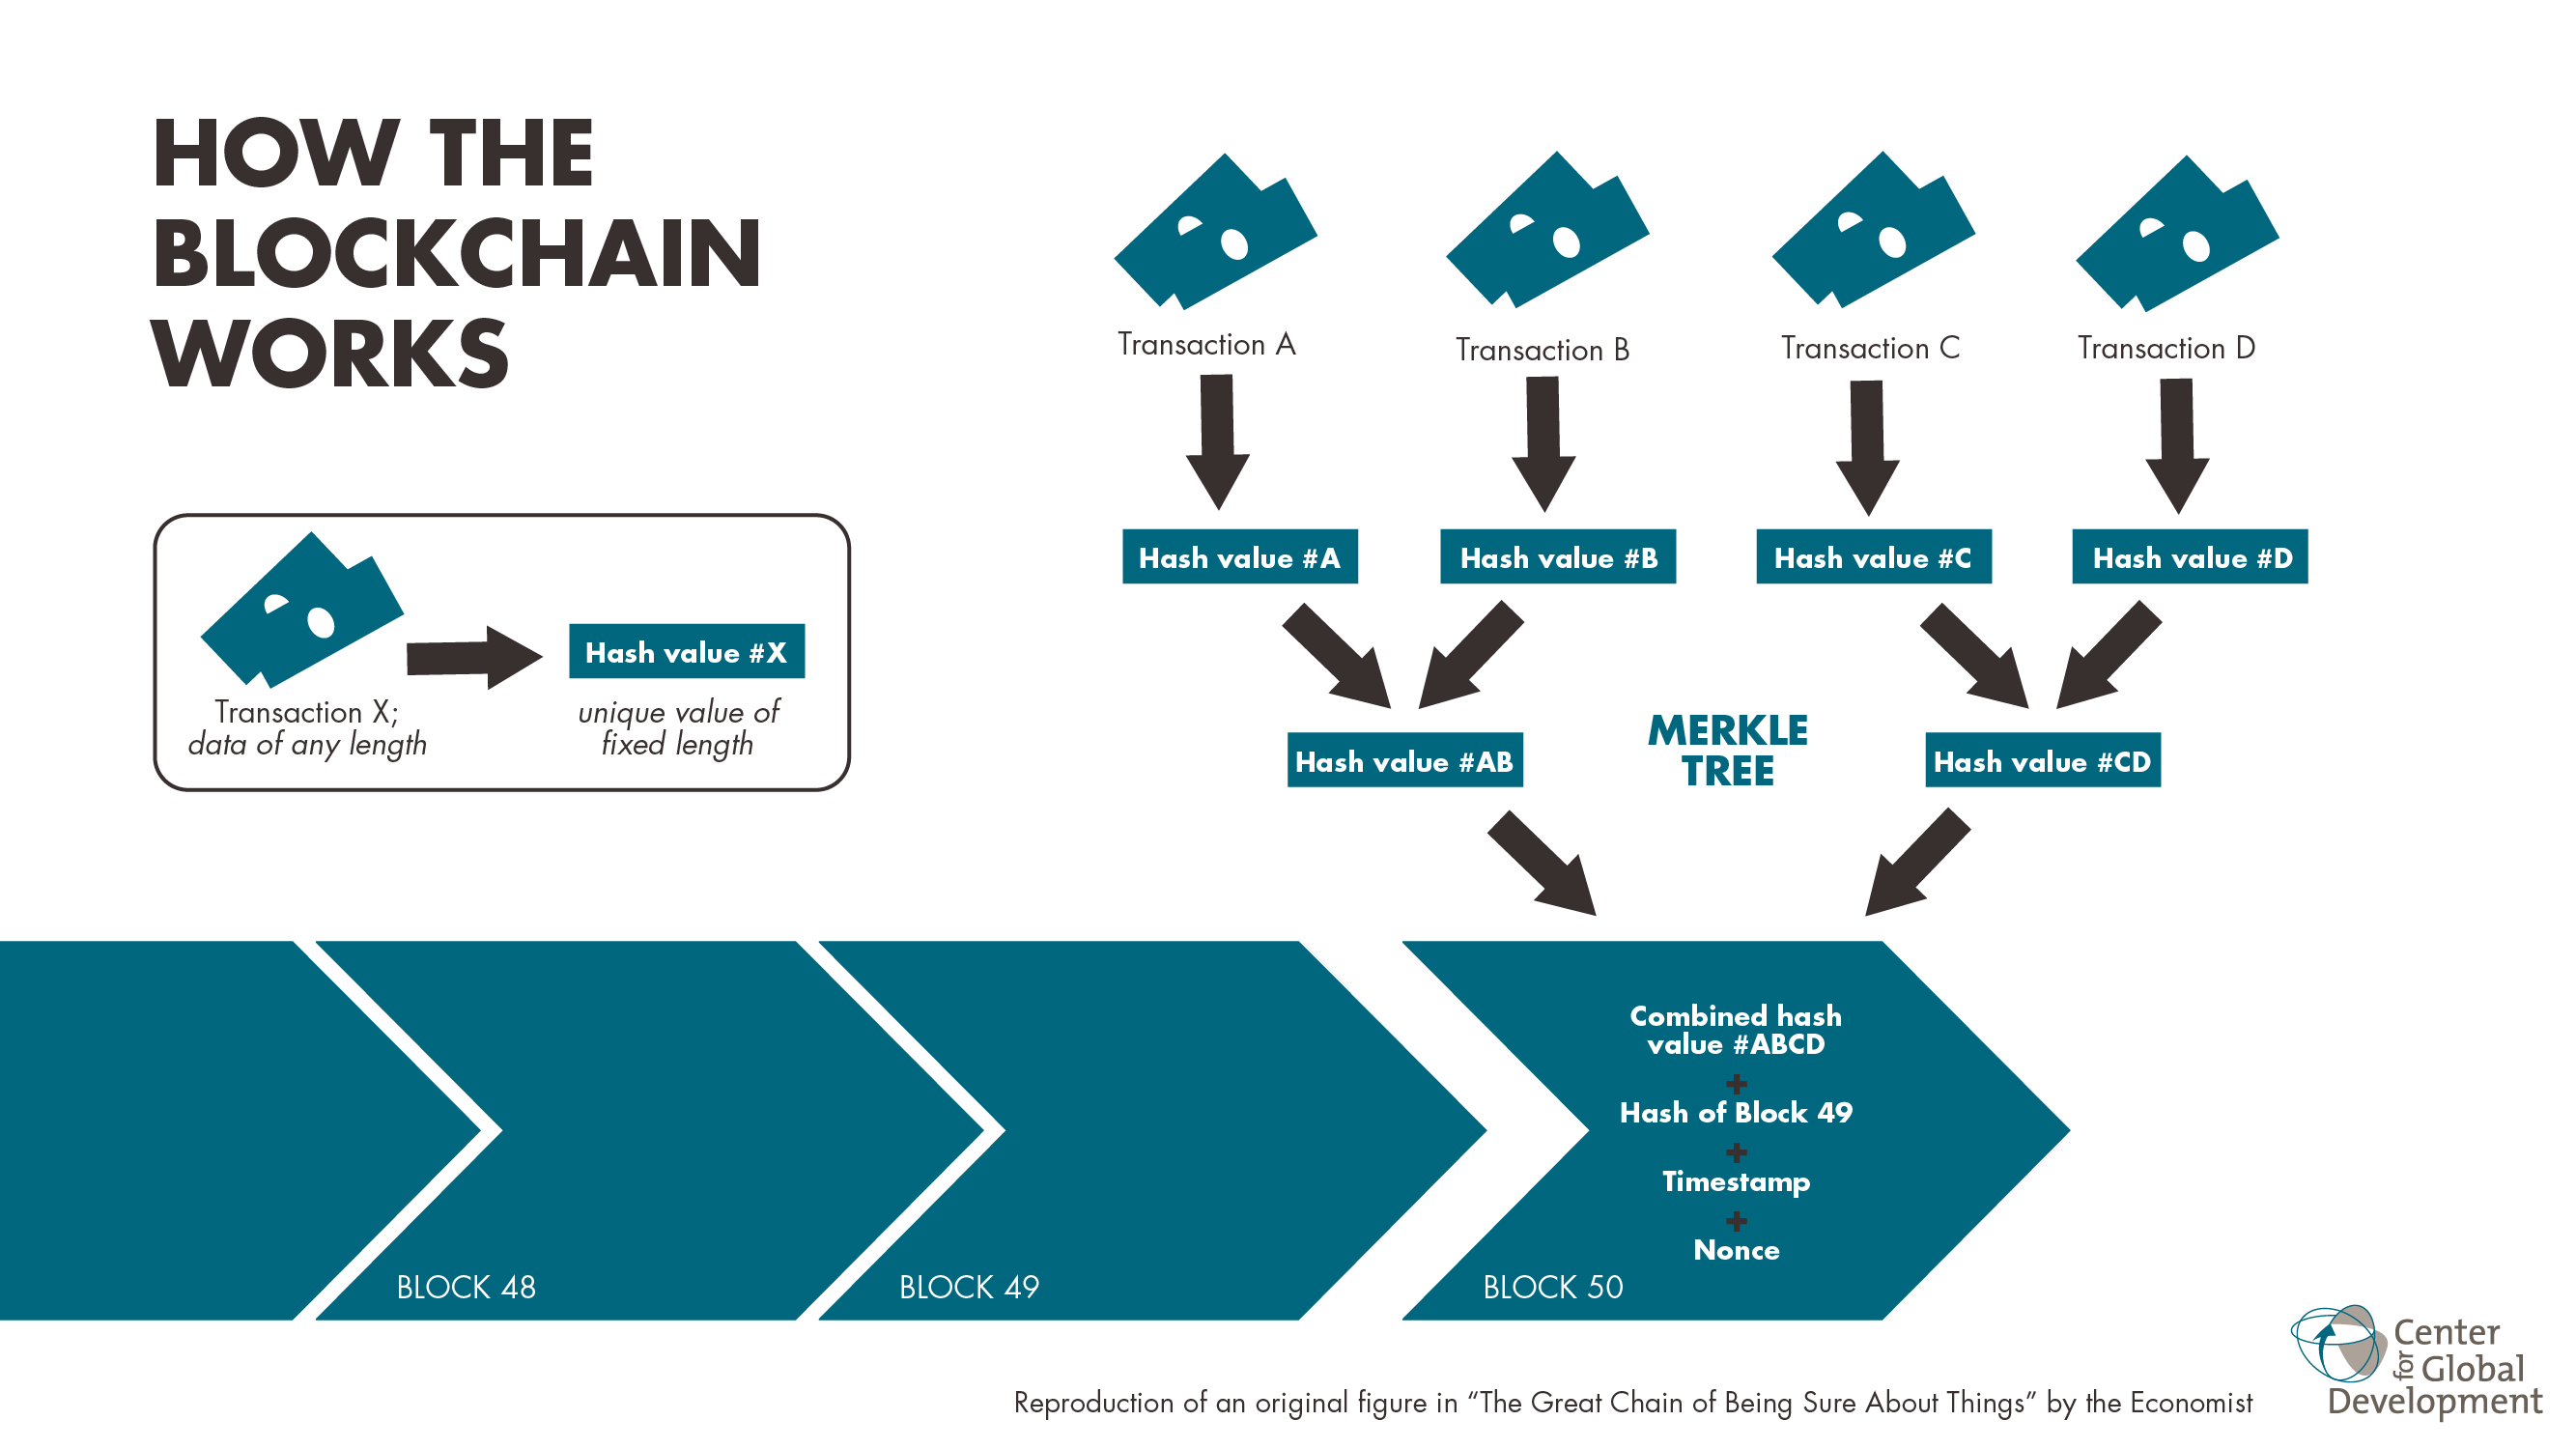 diagram about how blockchains work.